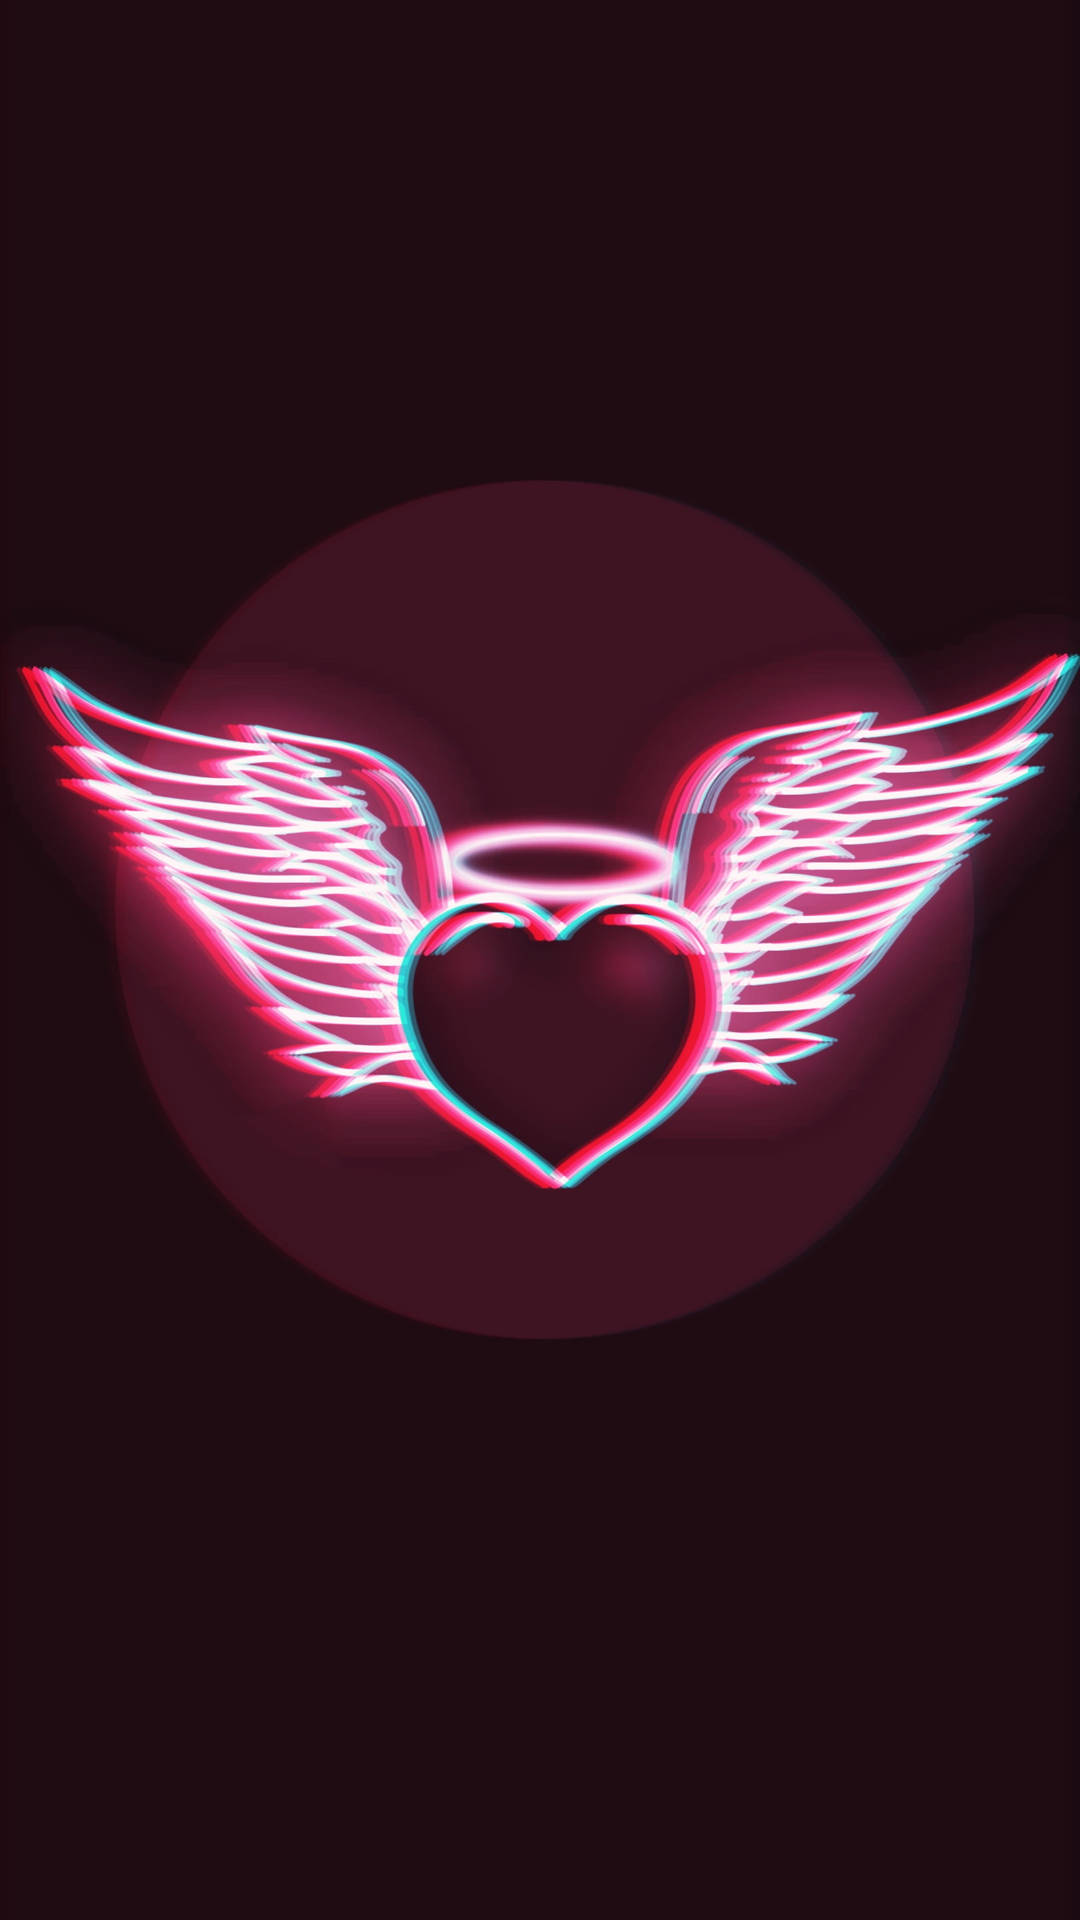 Heart With Wings Neon Aesthetic Iphone Wallpaper